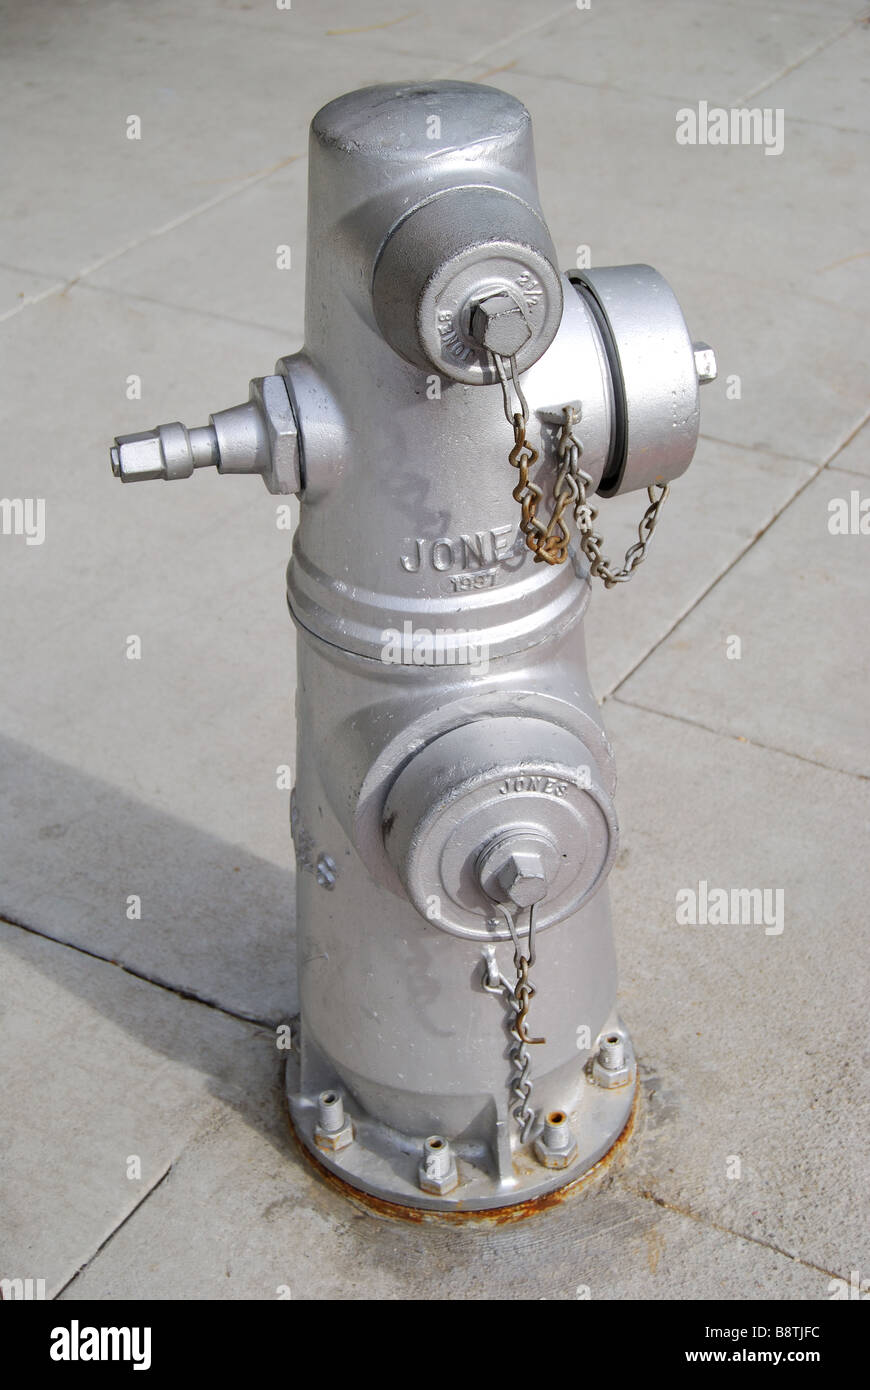 Fire hydrant, N.Rodeo Drive, Beverly Hills, Los Angeles, California, United States of America Stock Photo